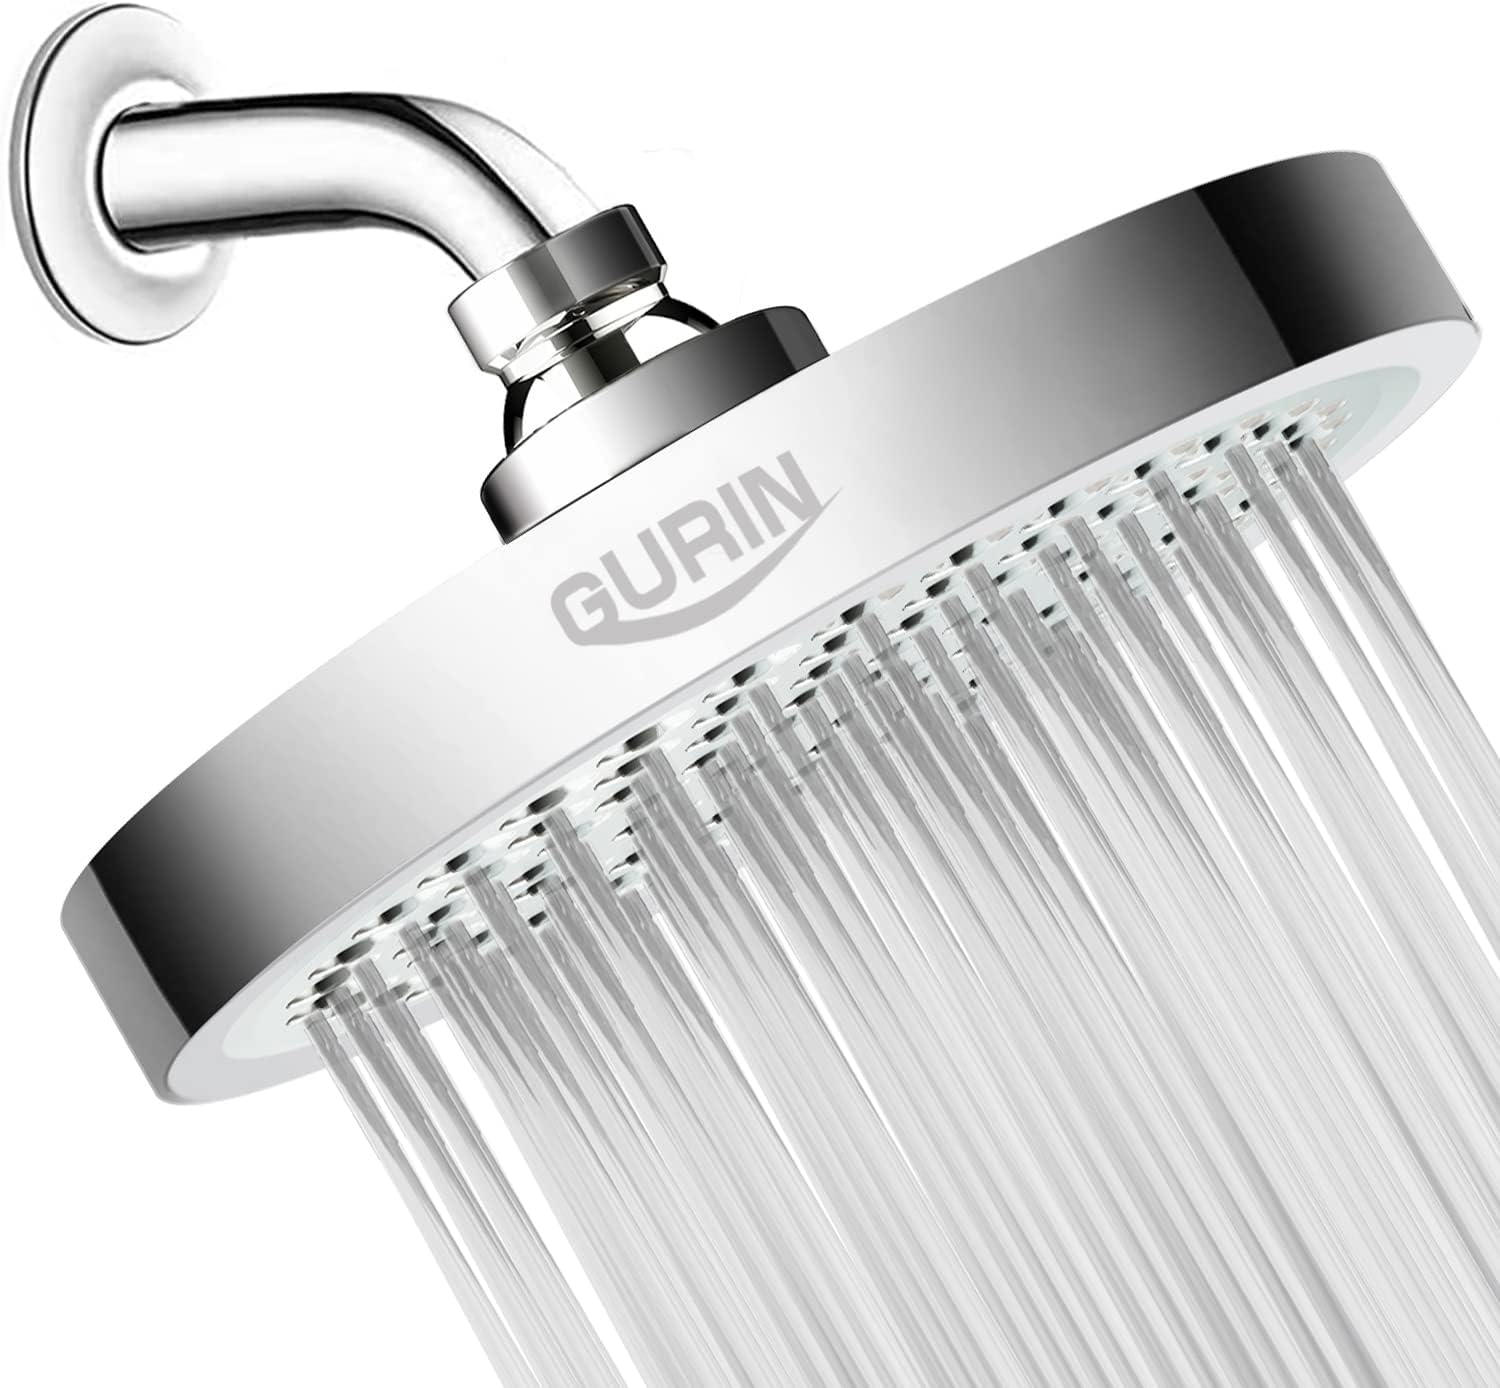 The GURIN High Pressure Rain Shower Head has completely transformed my shower experience into a luxurious spa-like retreat, and it unquestionably deserves a 5-star review. This showerhead is a true game-changer, and here' why it' truly exceptional:High Pressure Bliss: The standout feature of this showerhead is its incredible high-pressure performance. The rainfall-like spray is not only refreshing but also provides a thorough and invigorating cleanse.Luxury Redefined: With its chrome plated fi